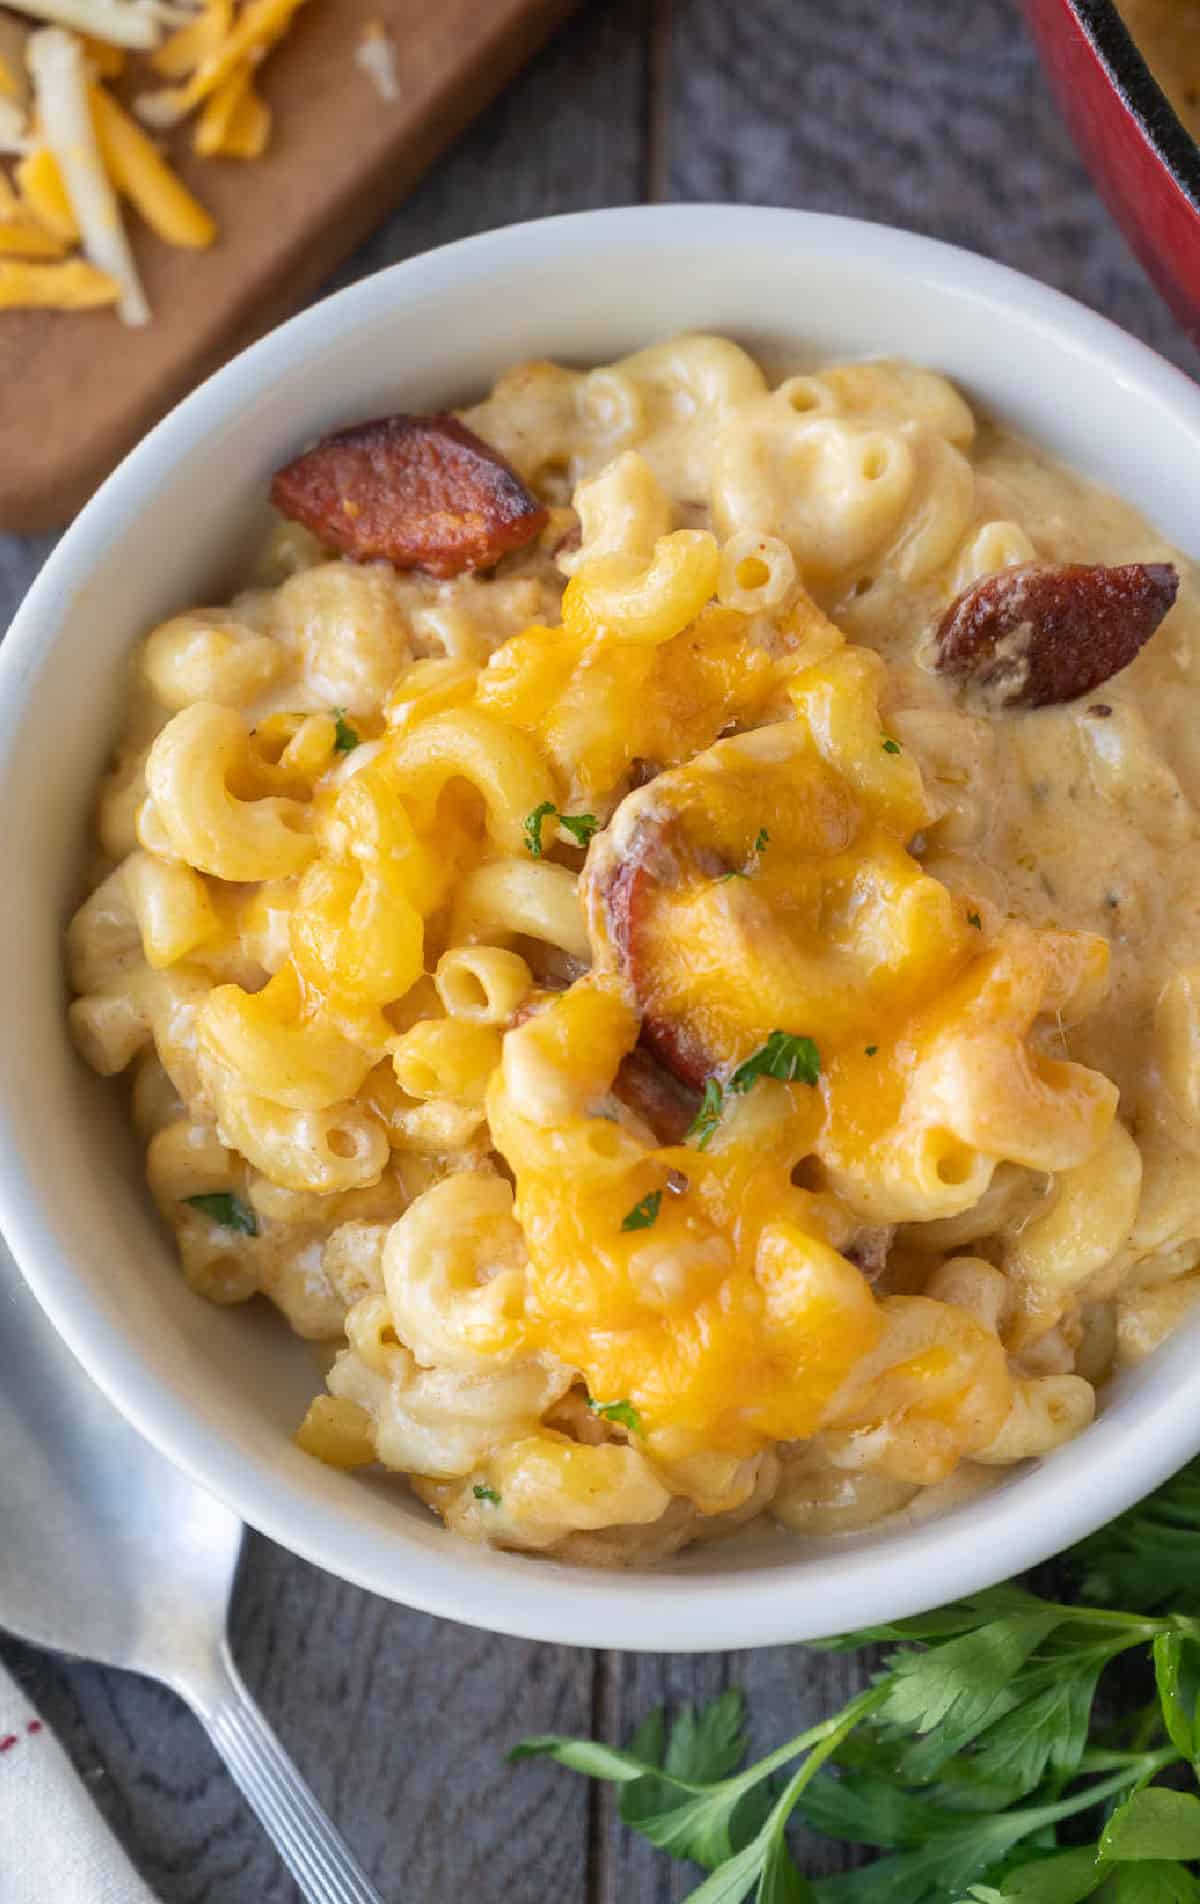 A bowl of macaroni and cheese with smoked sausage.